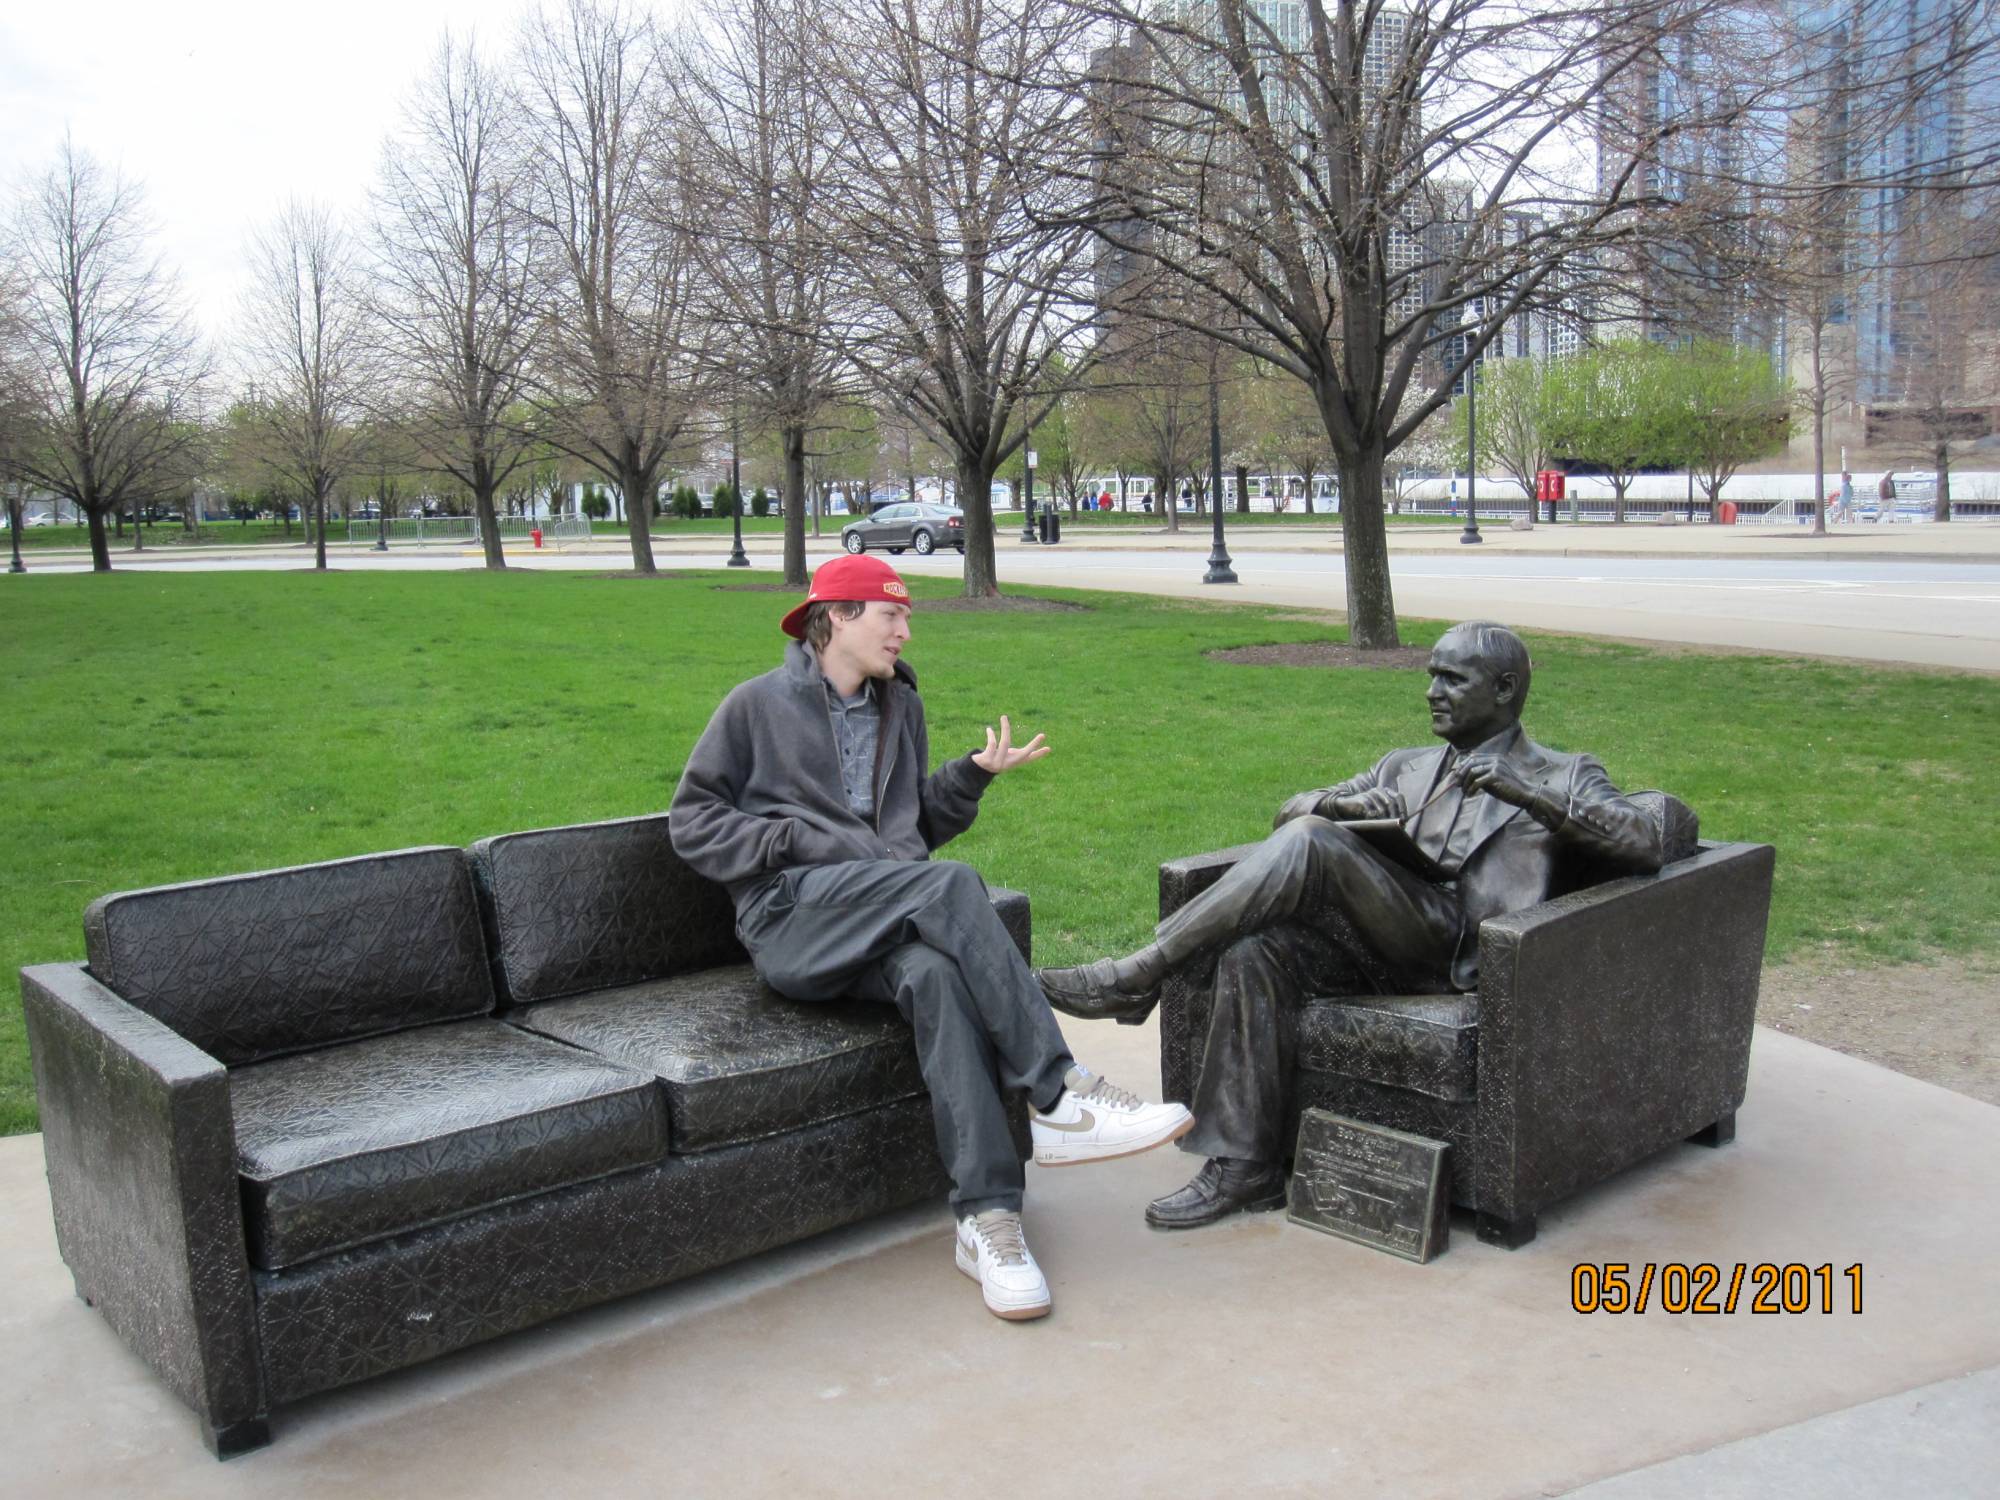 Chicago, Illinois - A one-sided conversation